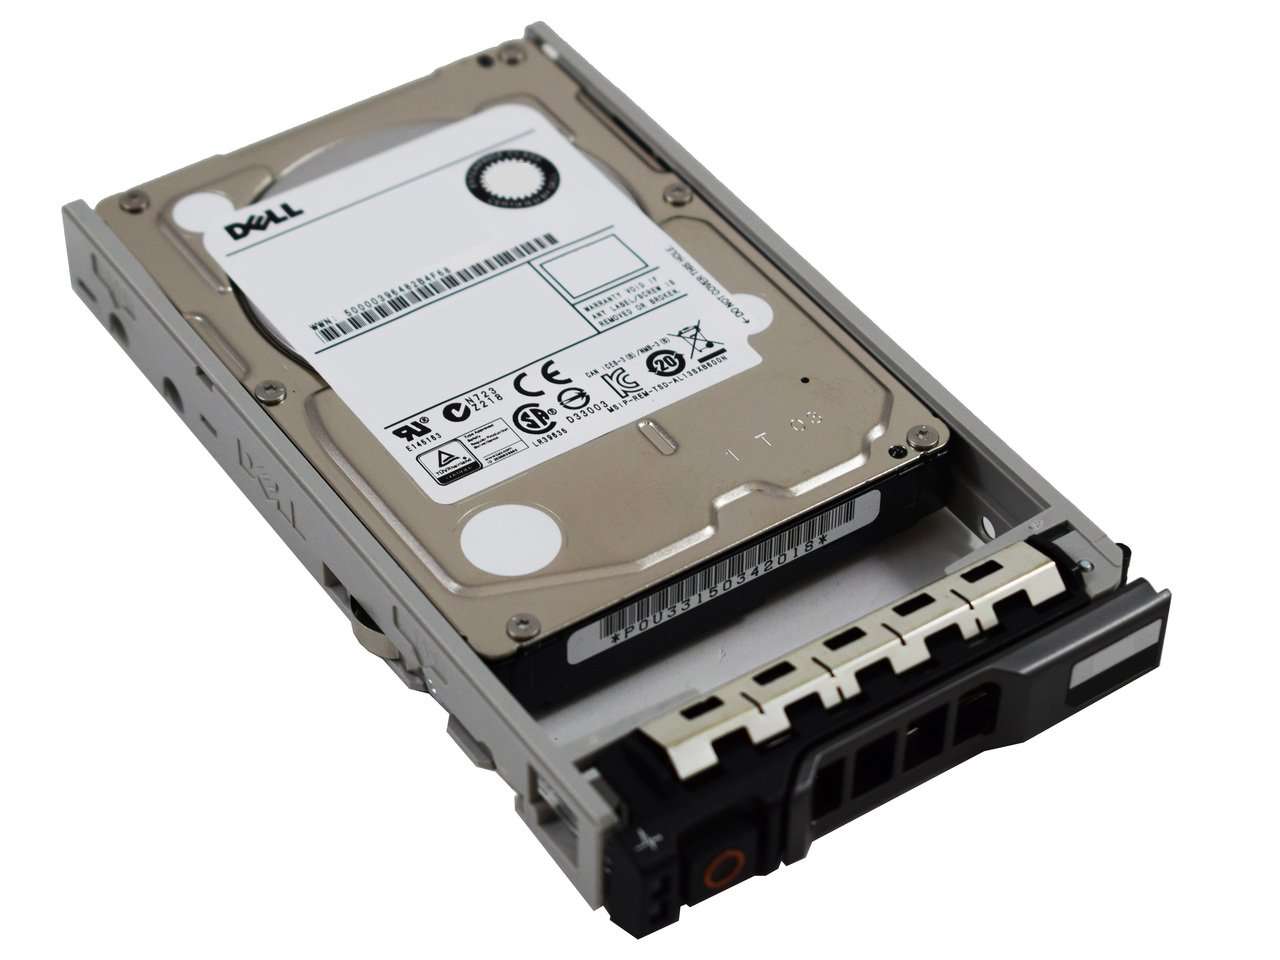 Dell G13 CCWW3 600GB 10K RPM SAS 6Gb/s 512n 2.5" Manufacturer Recertified HDD